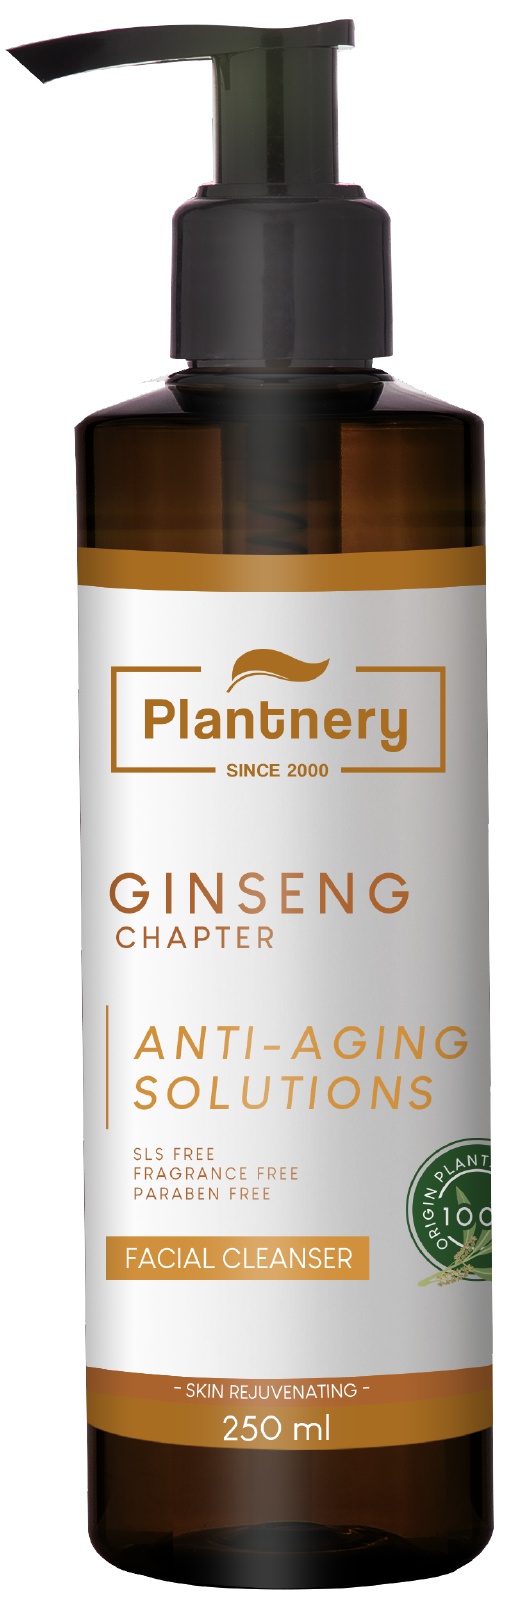 Plantnery Ginseng Facial Cleanser ingredients (Explained)